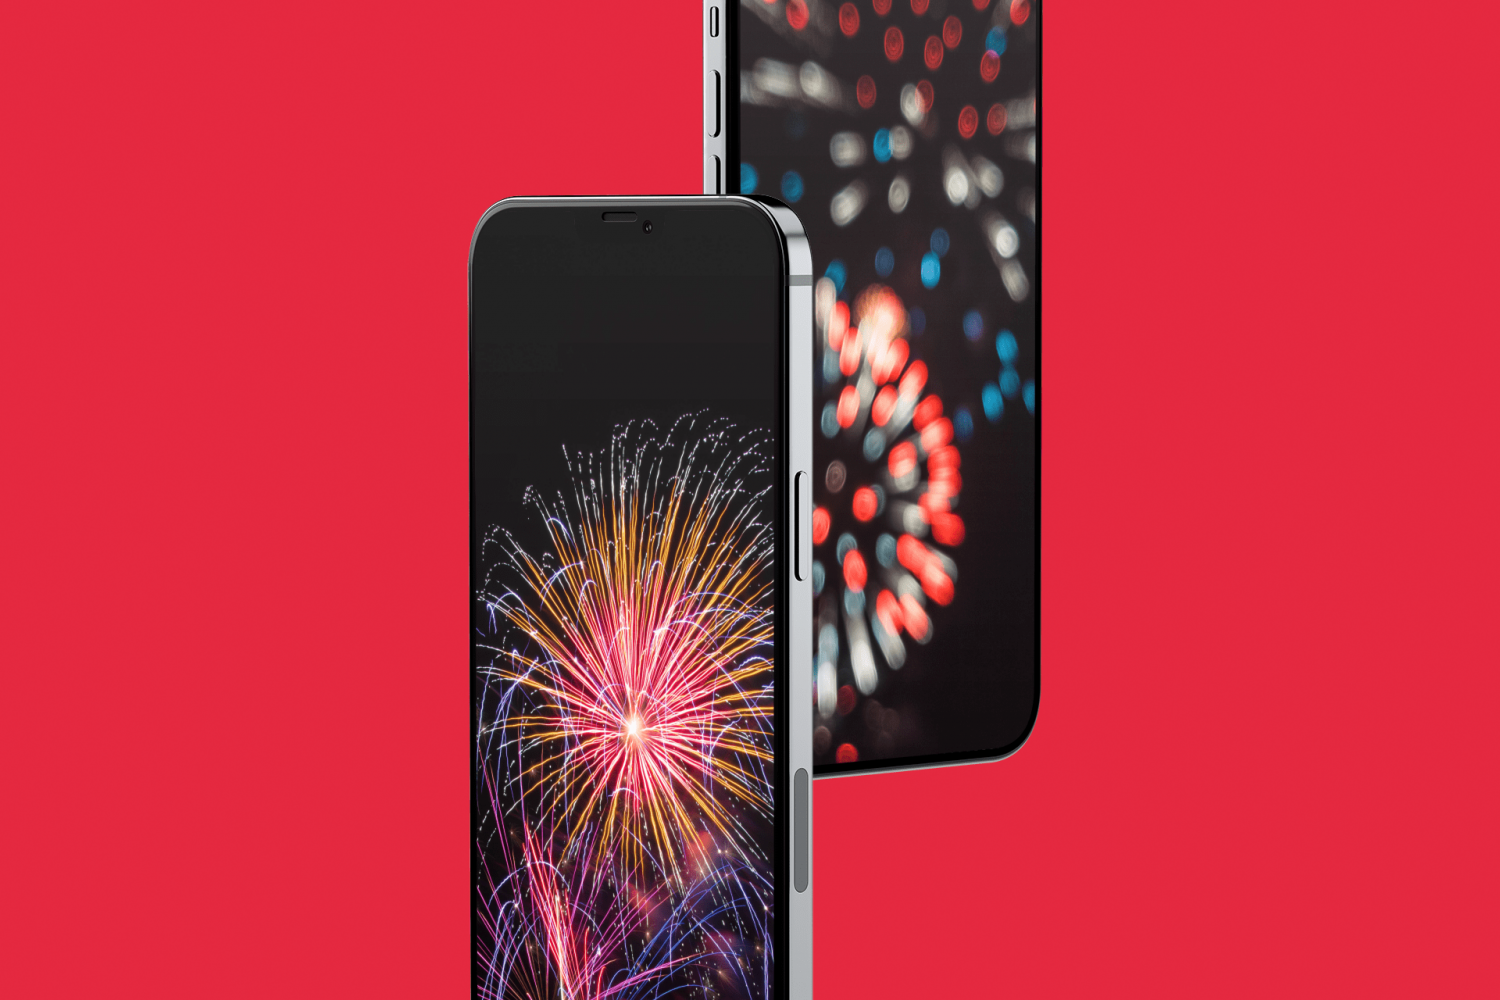 independence day iPhone fireworks wallpaper mockup